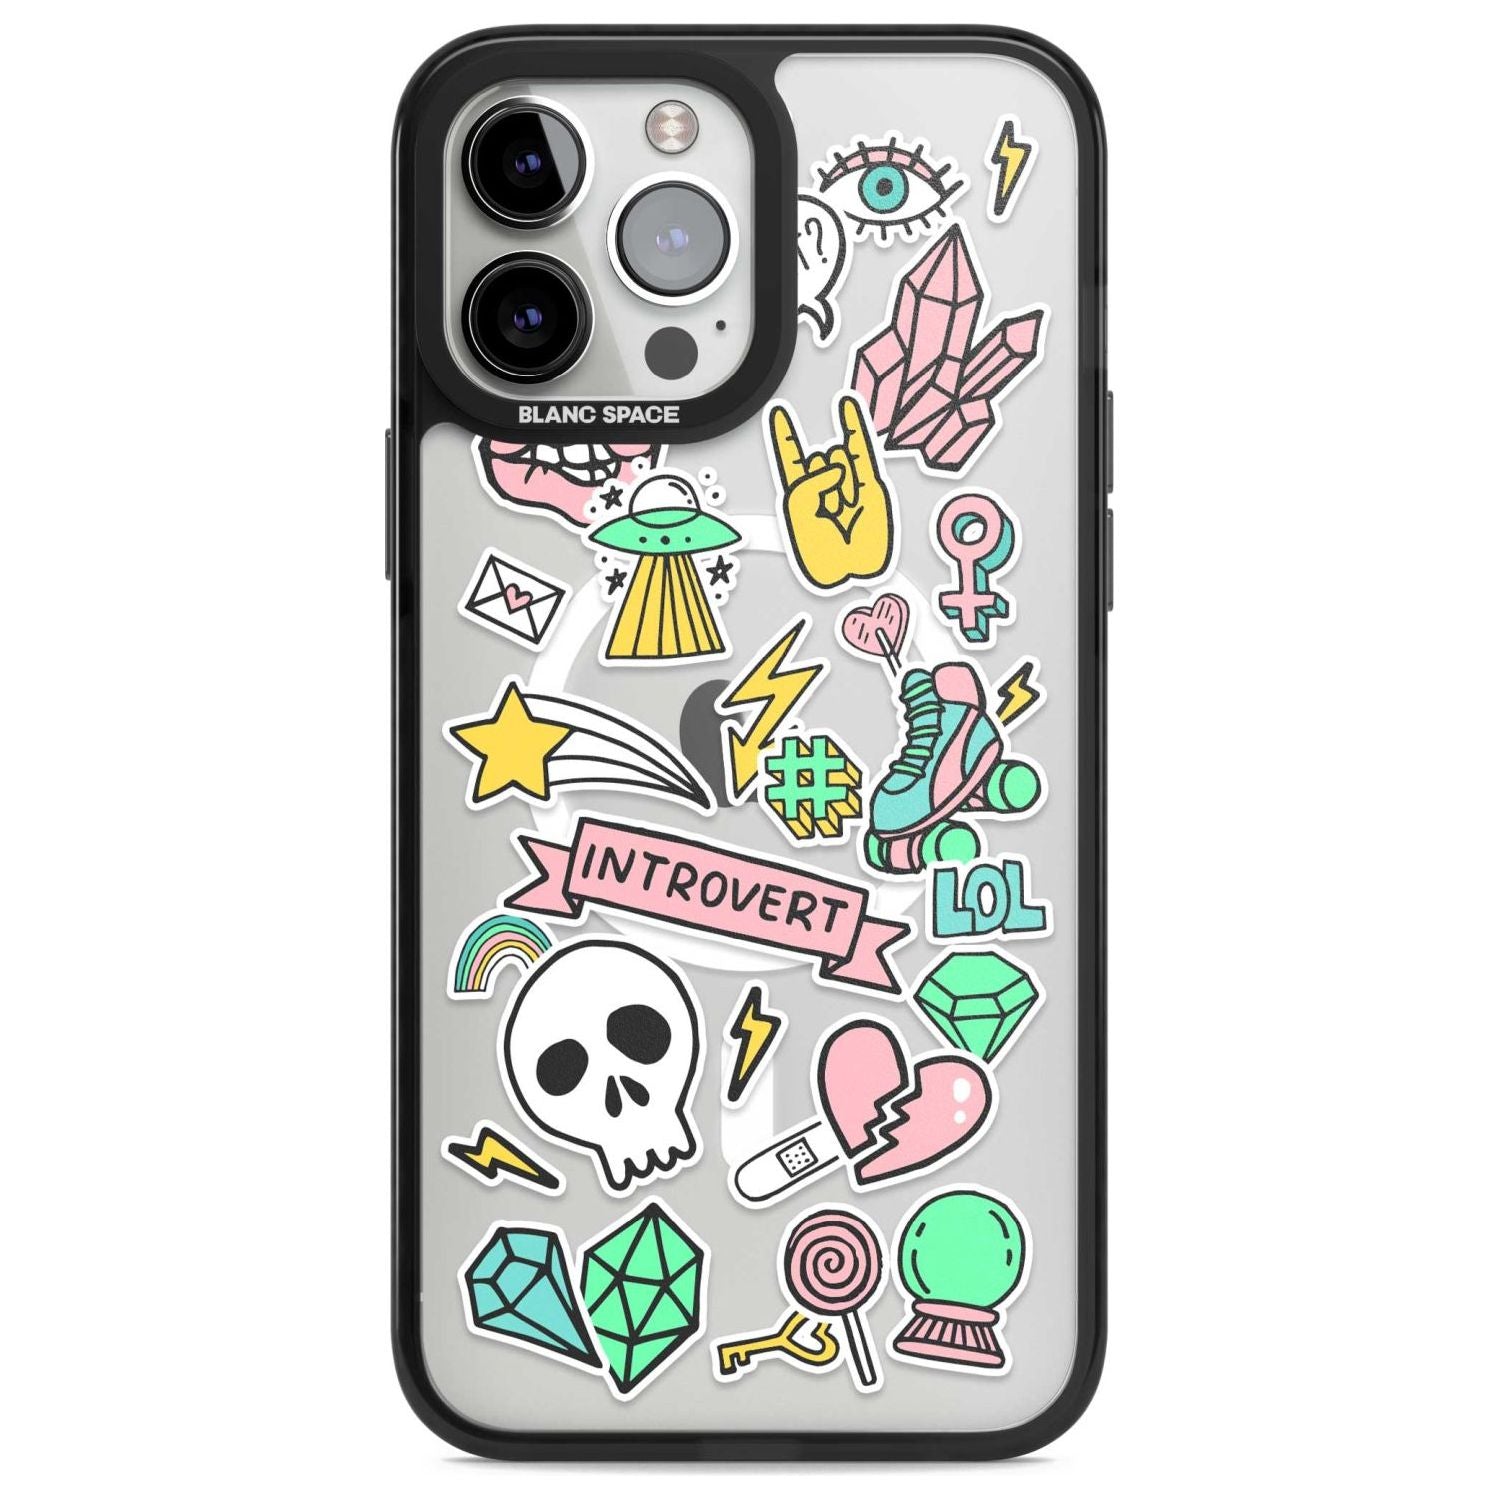 Introvert Sticker Phone Case iPhone 13 Pro Max / Magsafe Black Impact Case Blanc Space